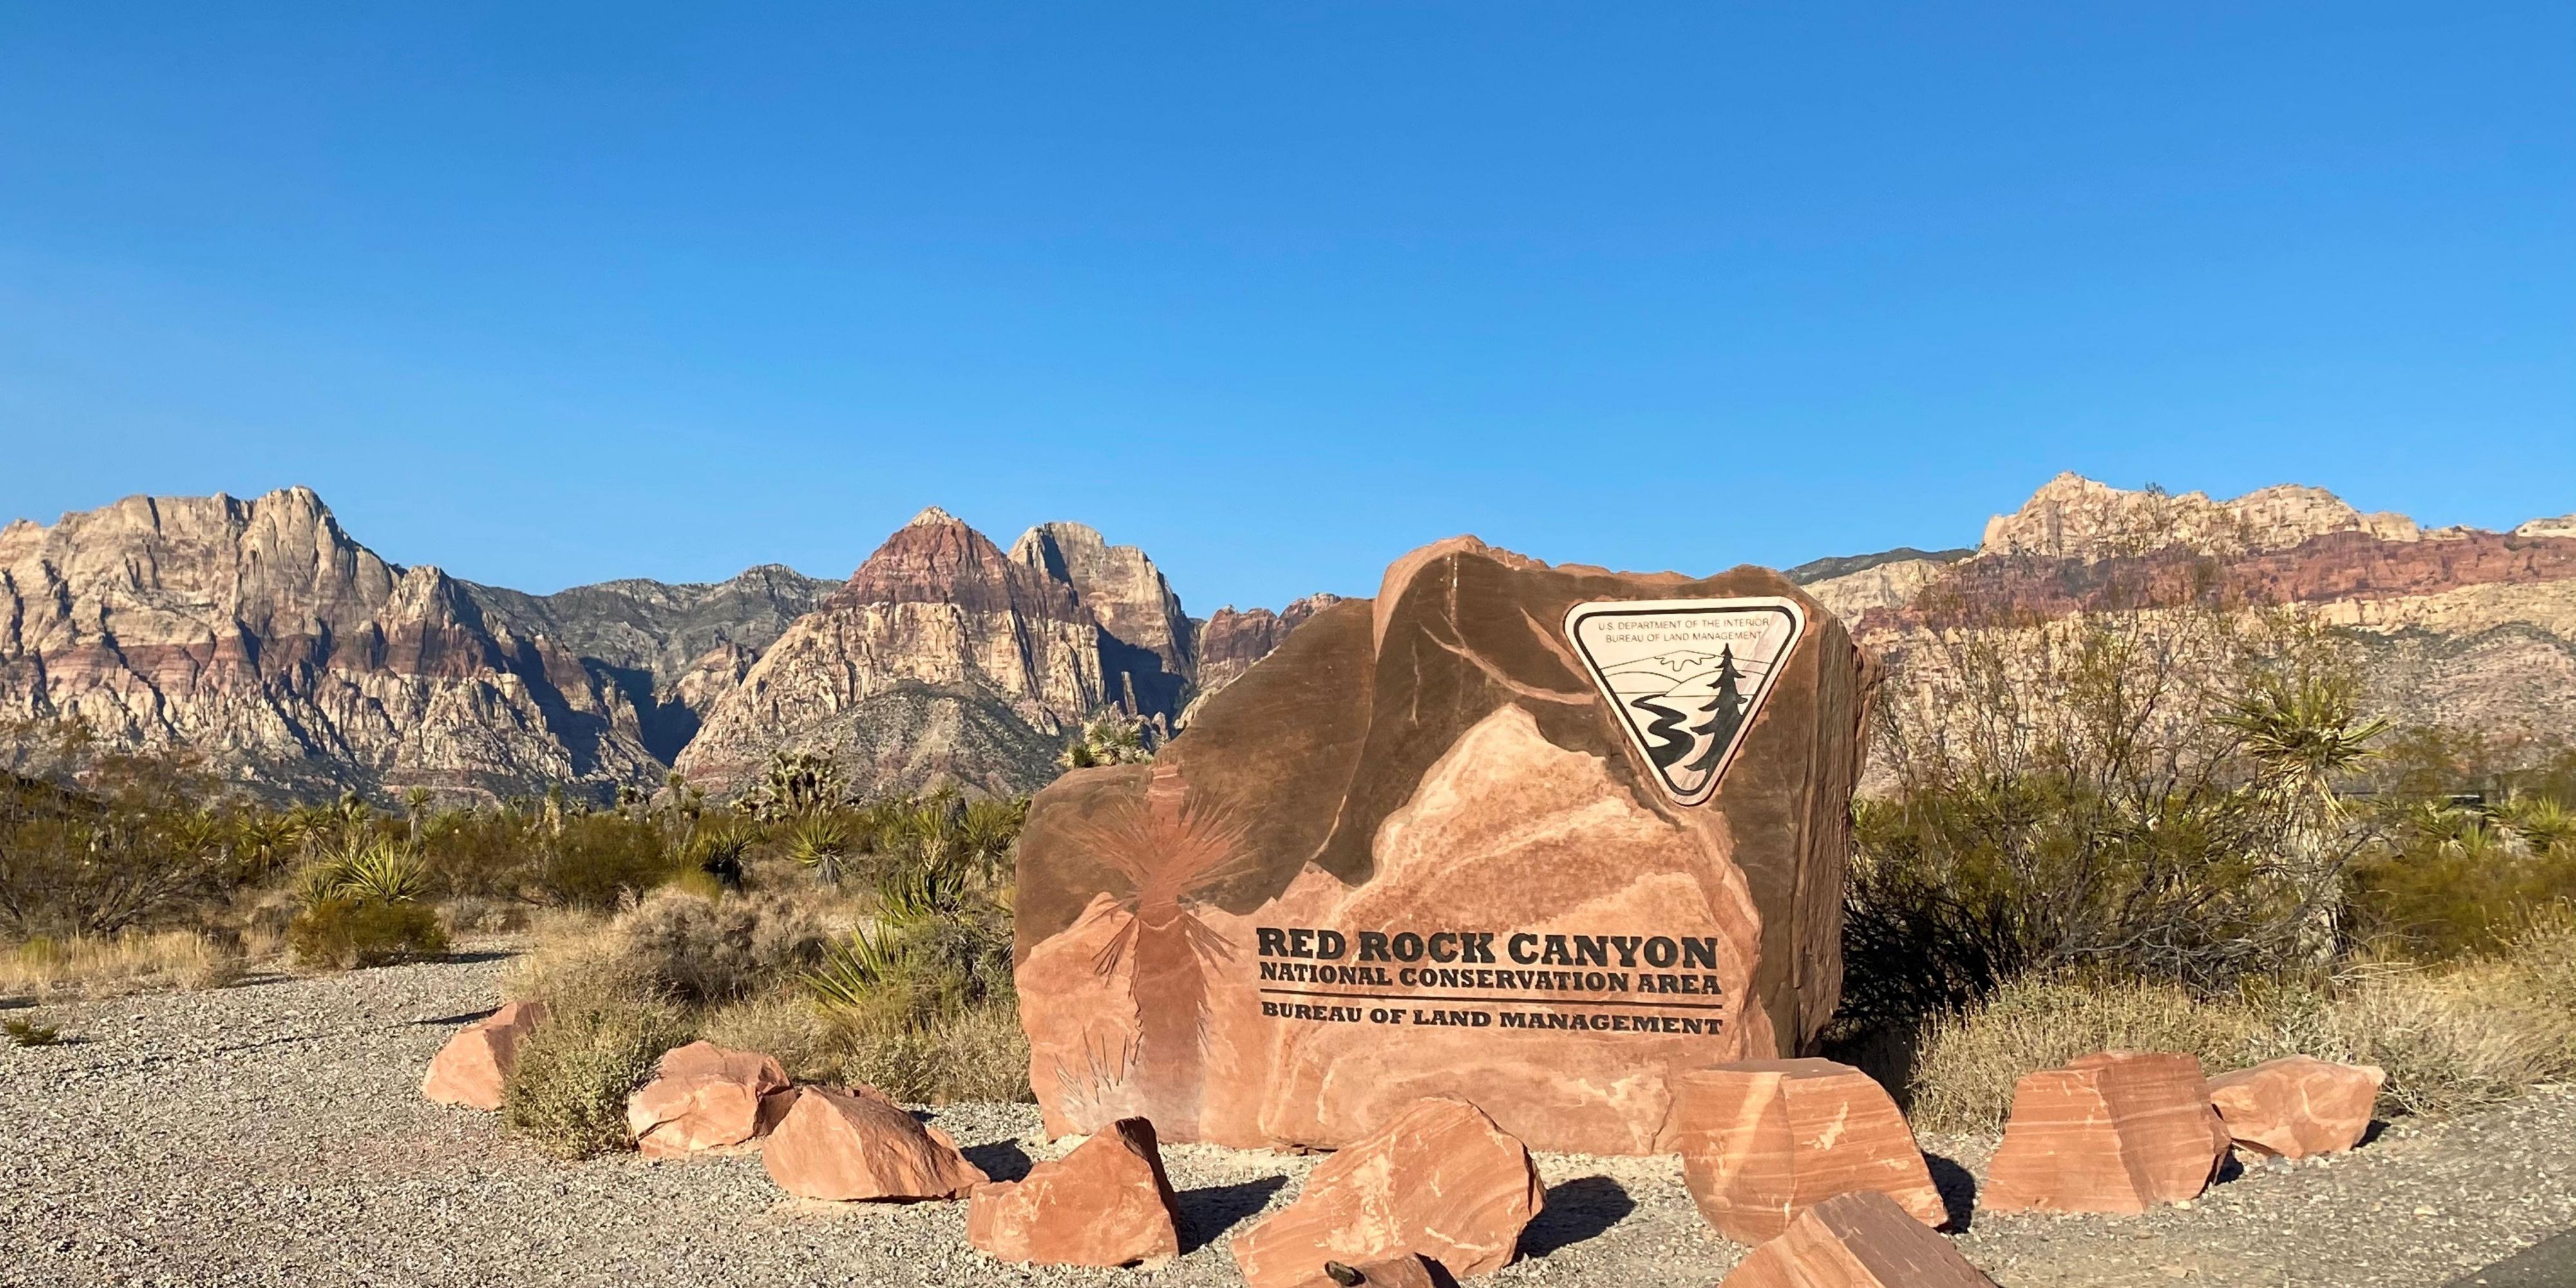 Vegas is much more than entertaining shows, gambling, and bright lights! Be sure to check out Red Rock Canyon while you are in town. Red Rock Canyon features a one-way 13-mile scenic drive, hiking and trails, plants and wildlife, geology, camping, cultural resources, and much more. 